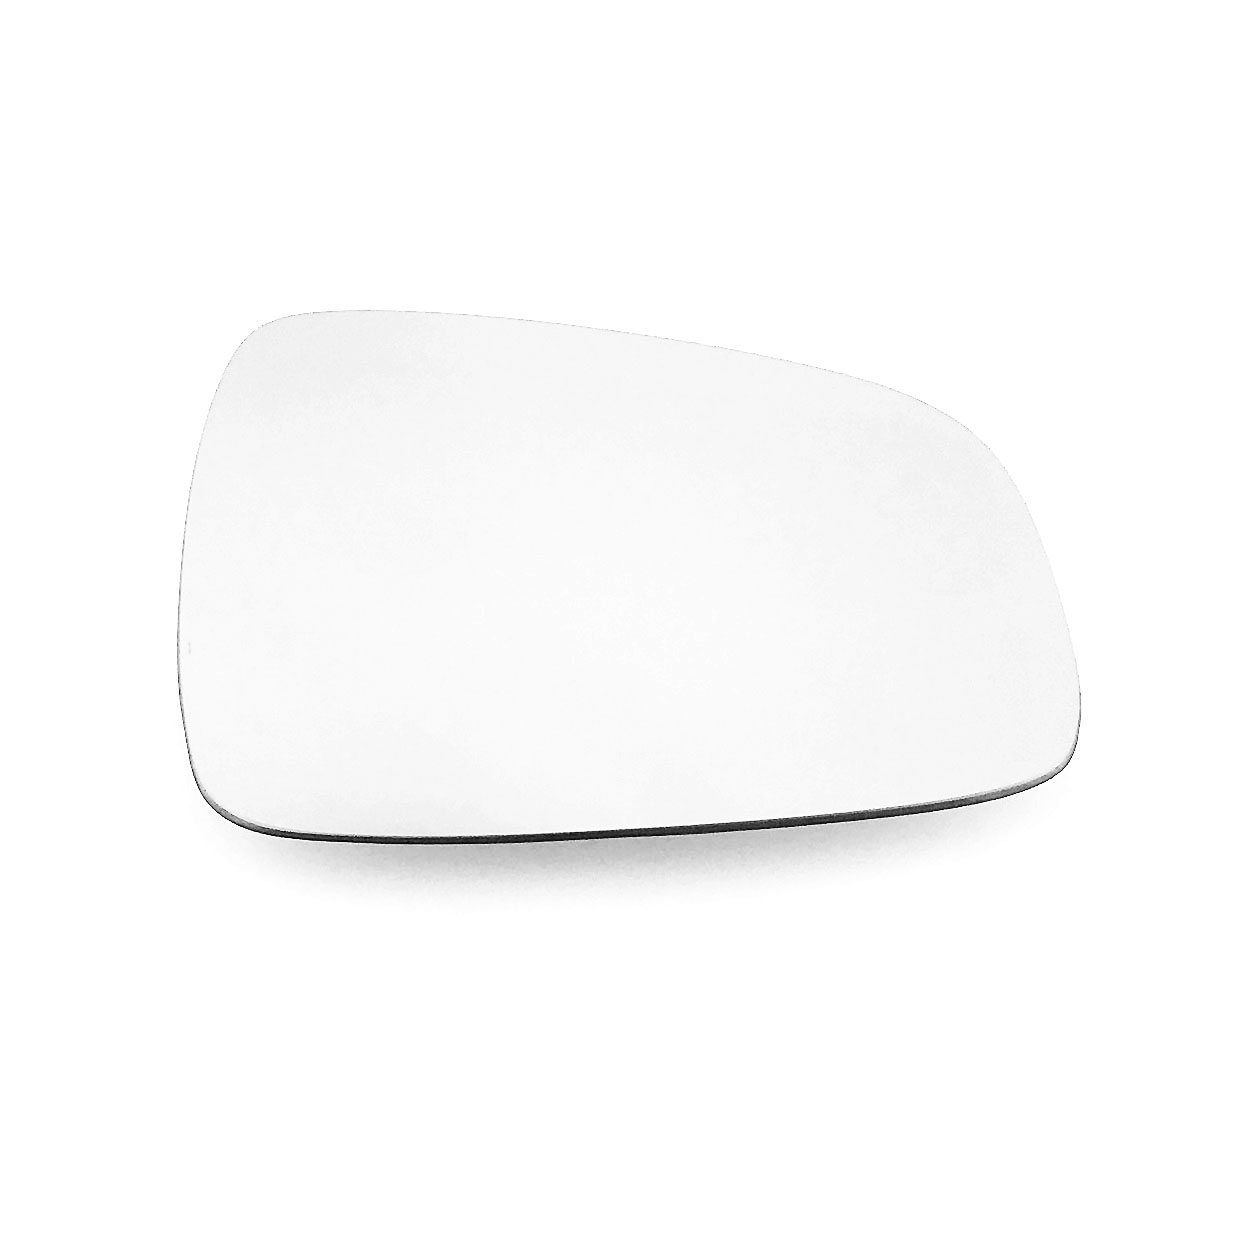 Dacia Logan Wing Mirror Glass RIGHT HAND ( UK Driver Side ) 2013 to 2020 – Convex Wing Mirror